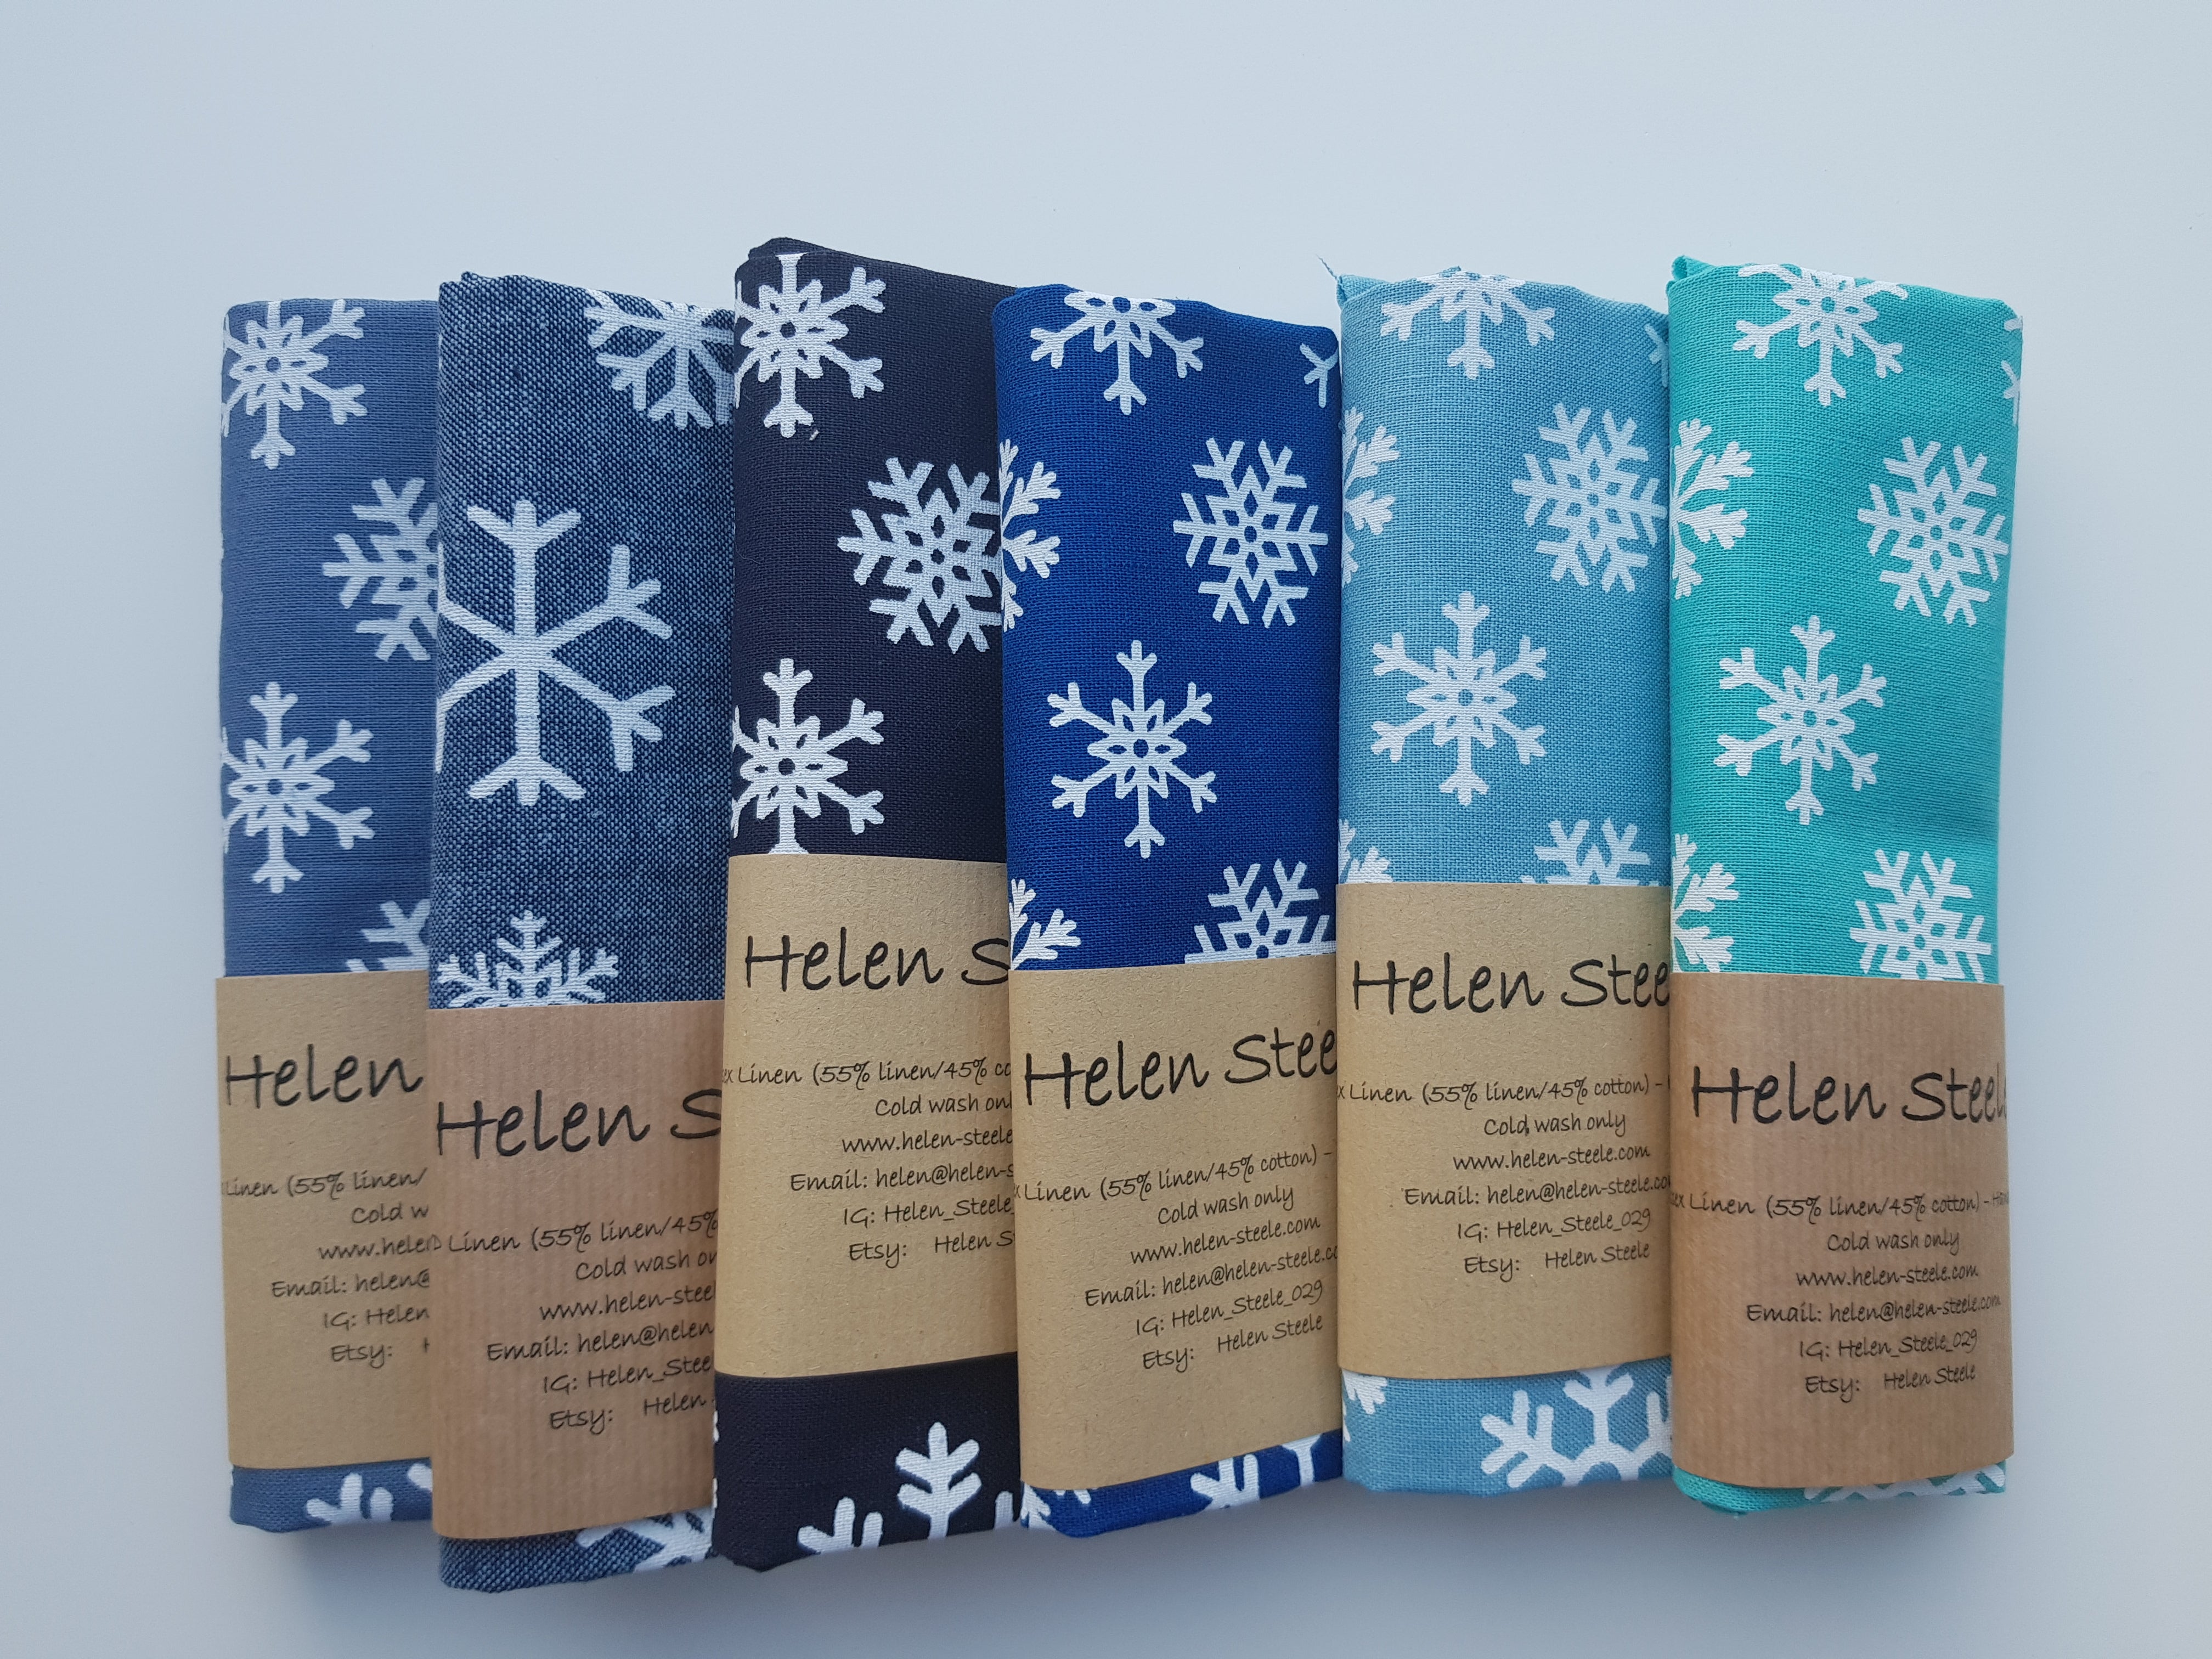 SNOWFLAKES - A Snowflake is not just for Christmas - Essex Linen Screen Printed Snowflake panels